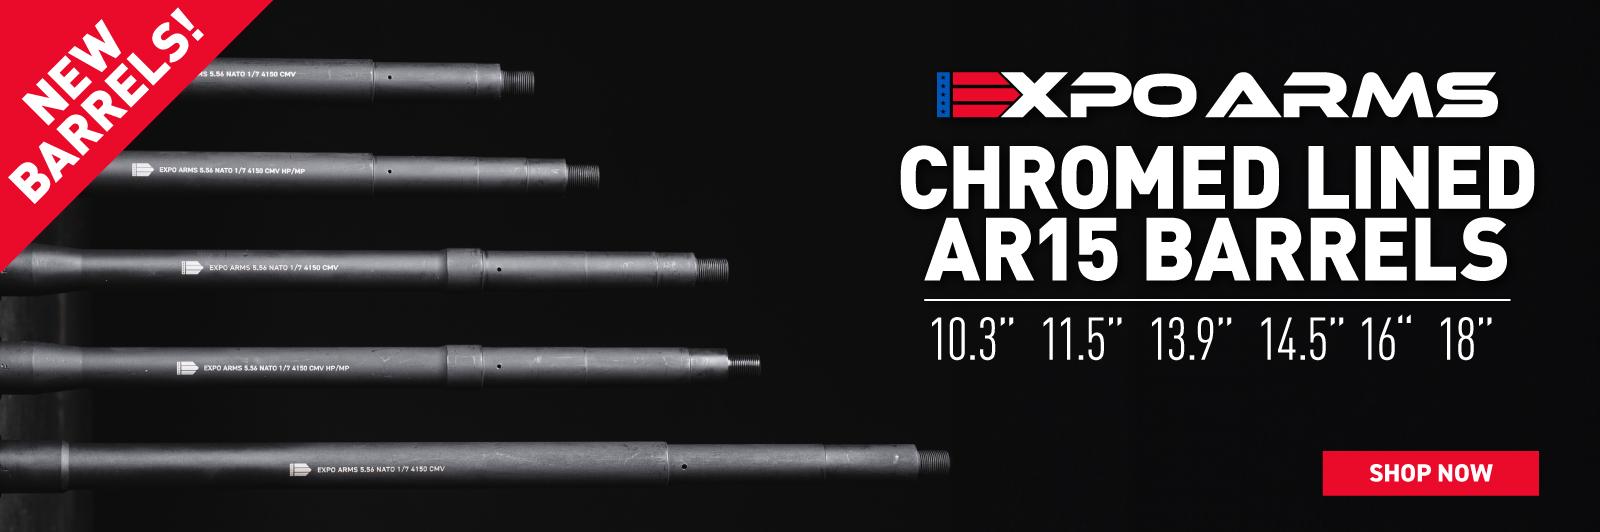 NEW Expo Arms Barrels now Available!